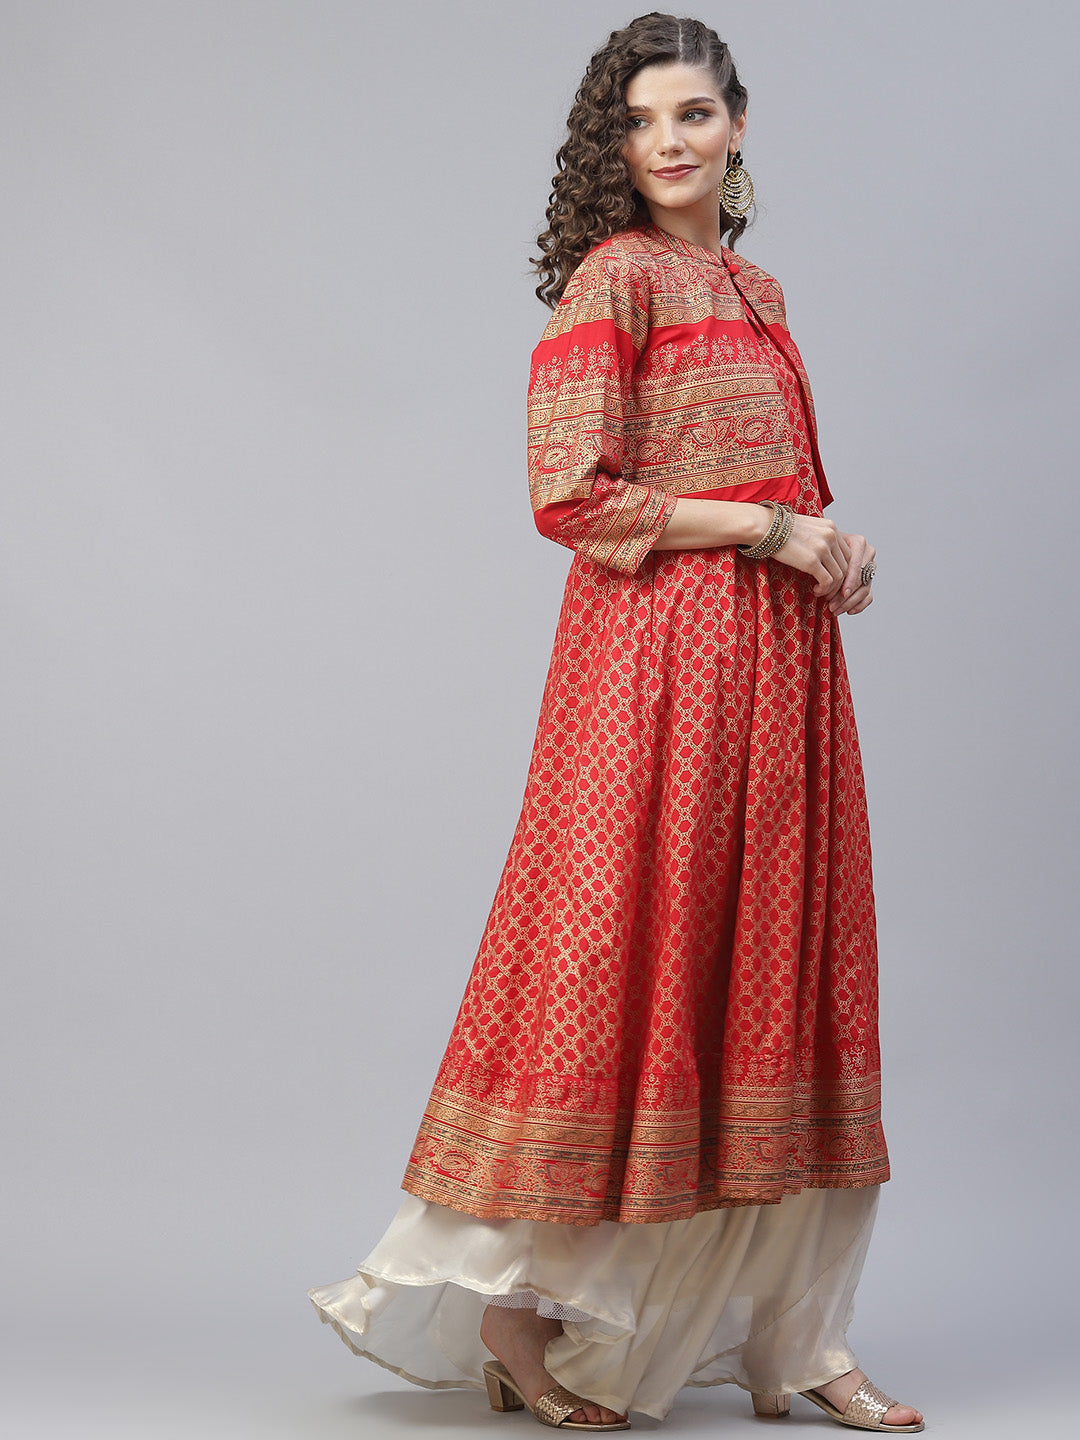 Women's Red Gold Print Anarkali With Jacket - Aks